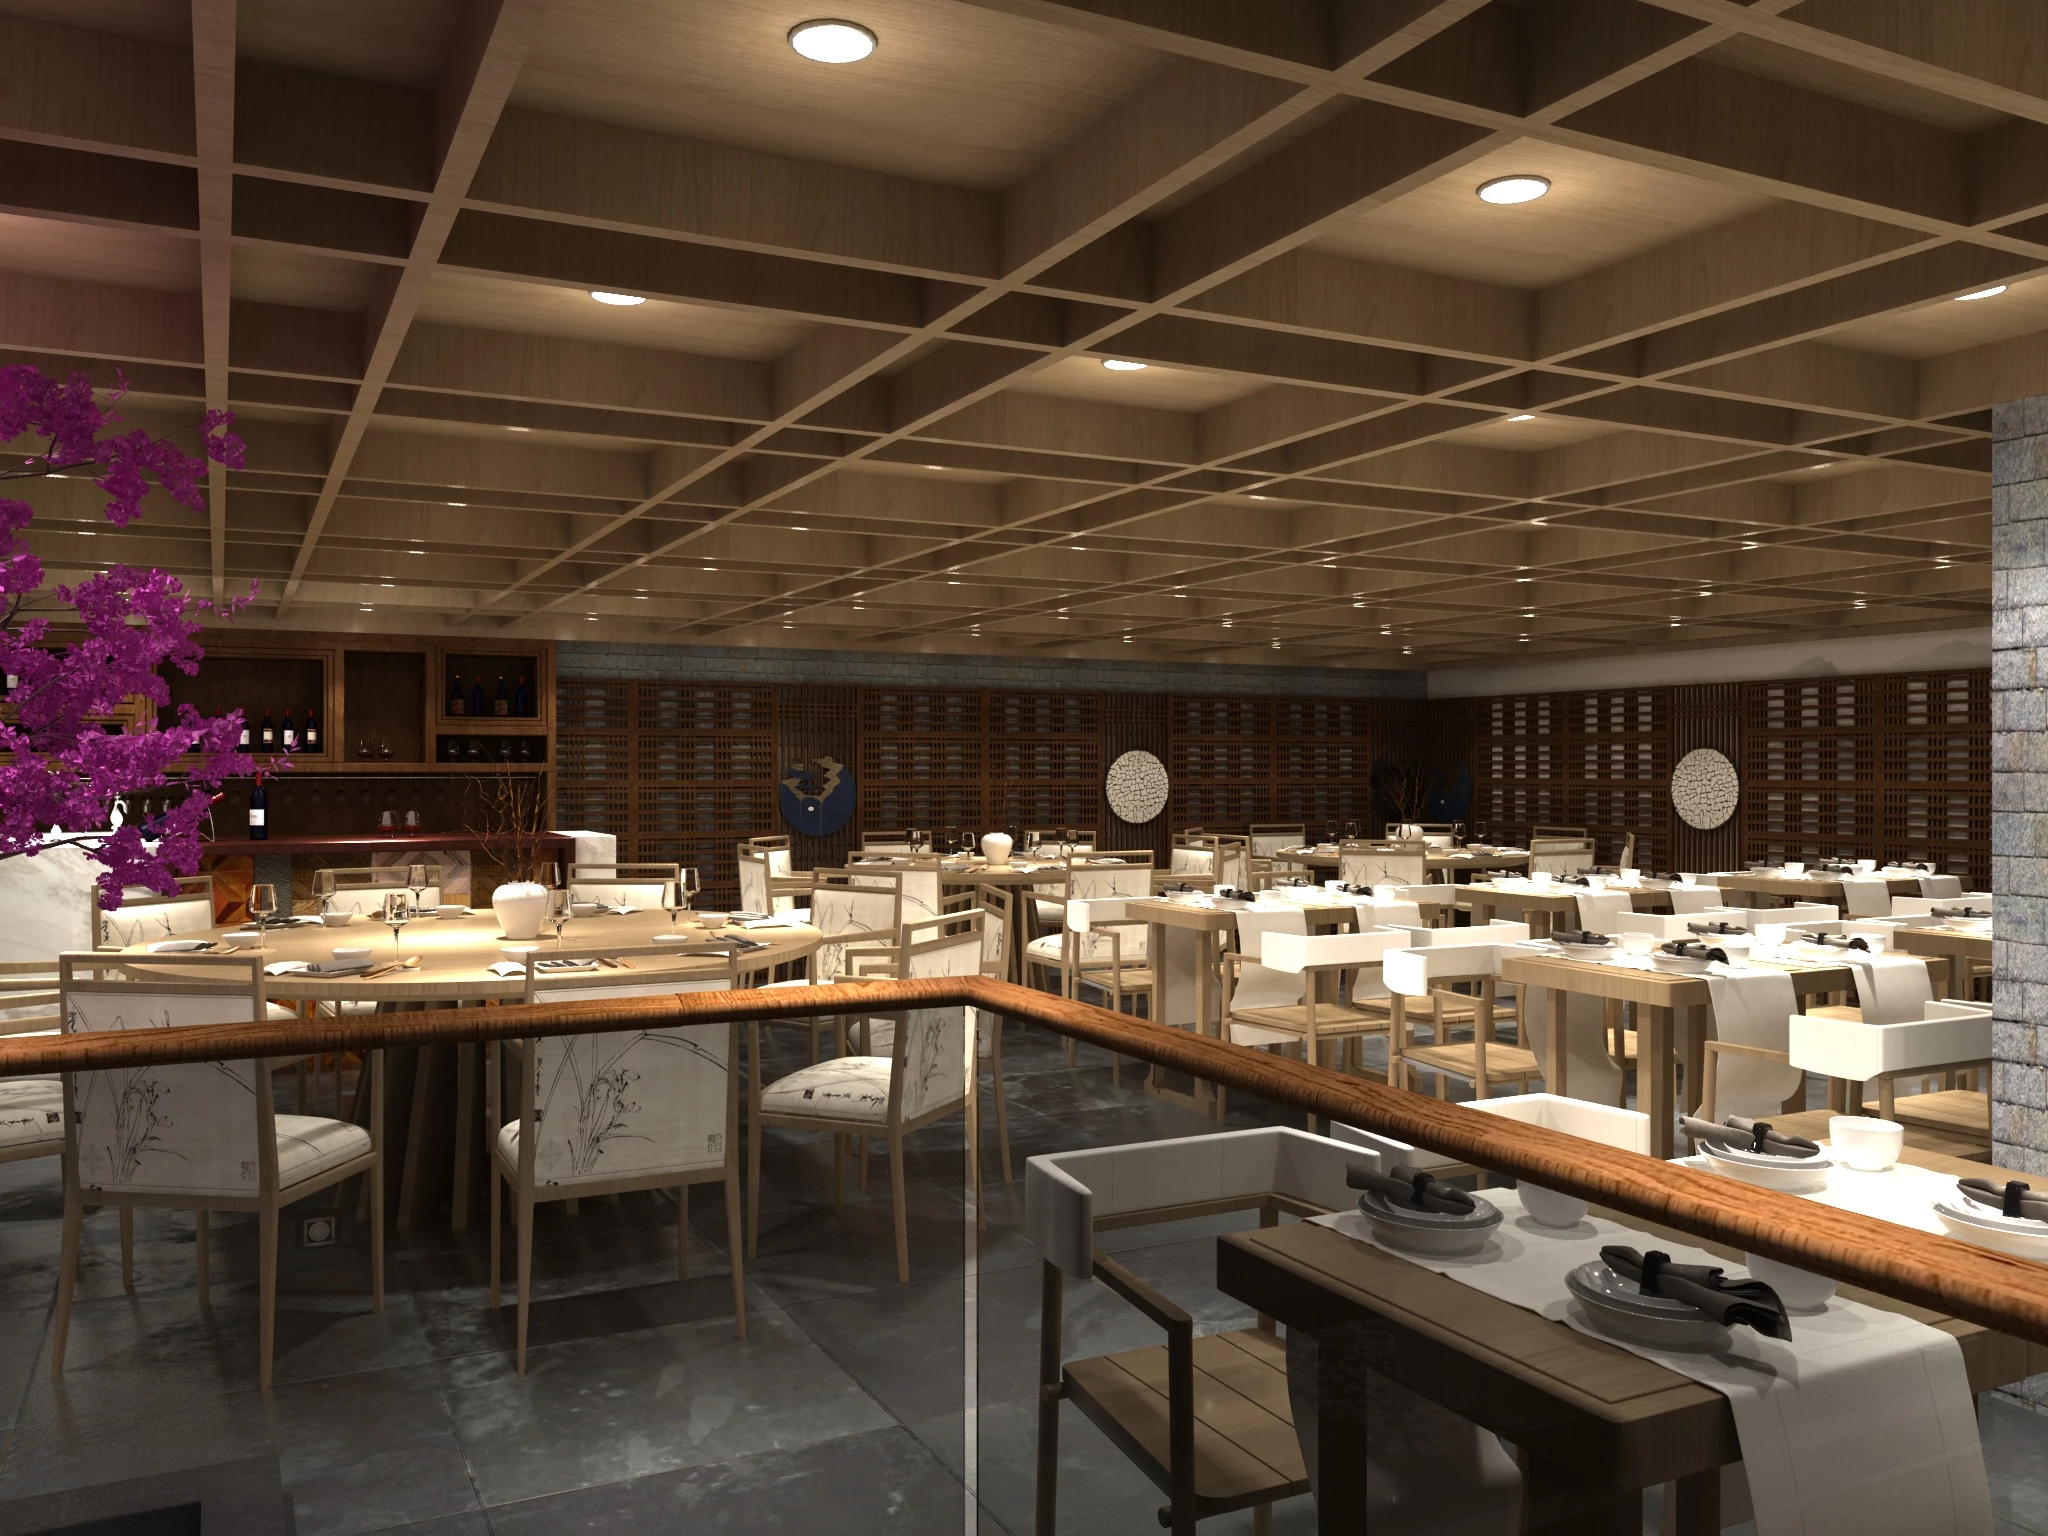 JinLi Chinatown's interiors will feature wooden panels and soft lighting